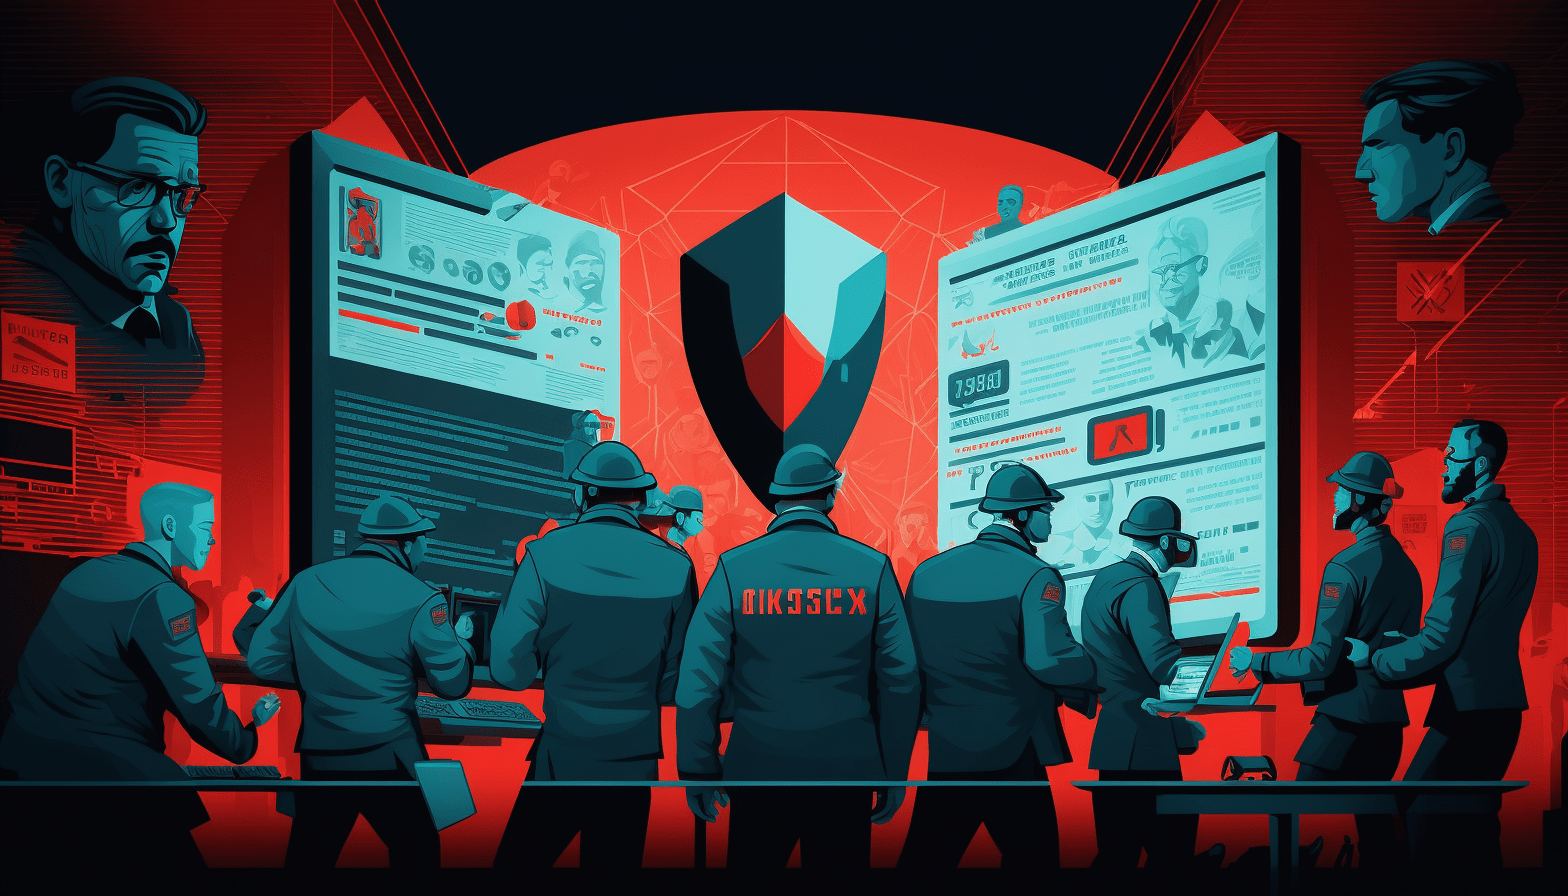 An illustrated image of a team of cybersecurity professionals working together to respond to a security incident, with a red alert icon in the background indicating the urgency of the situation. 